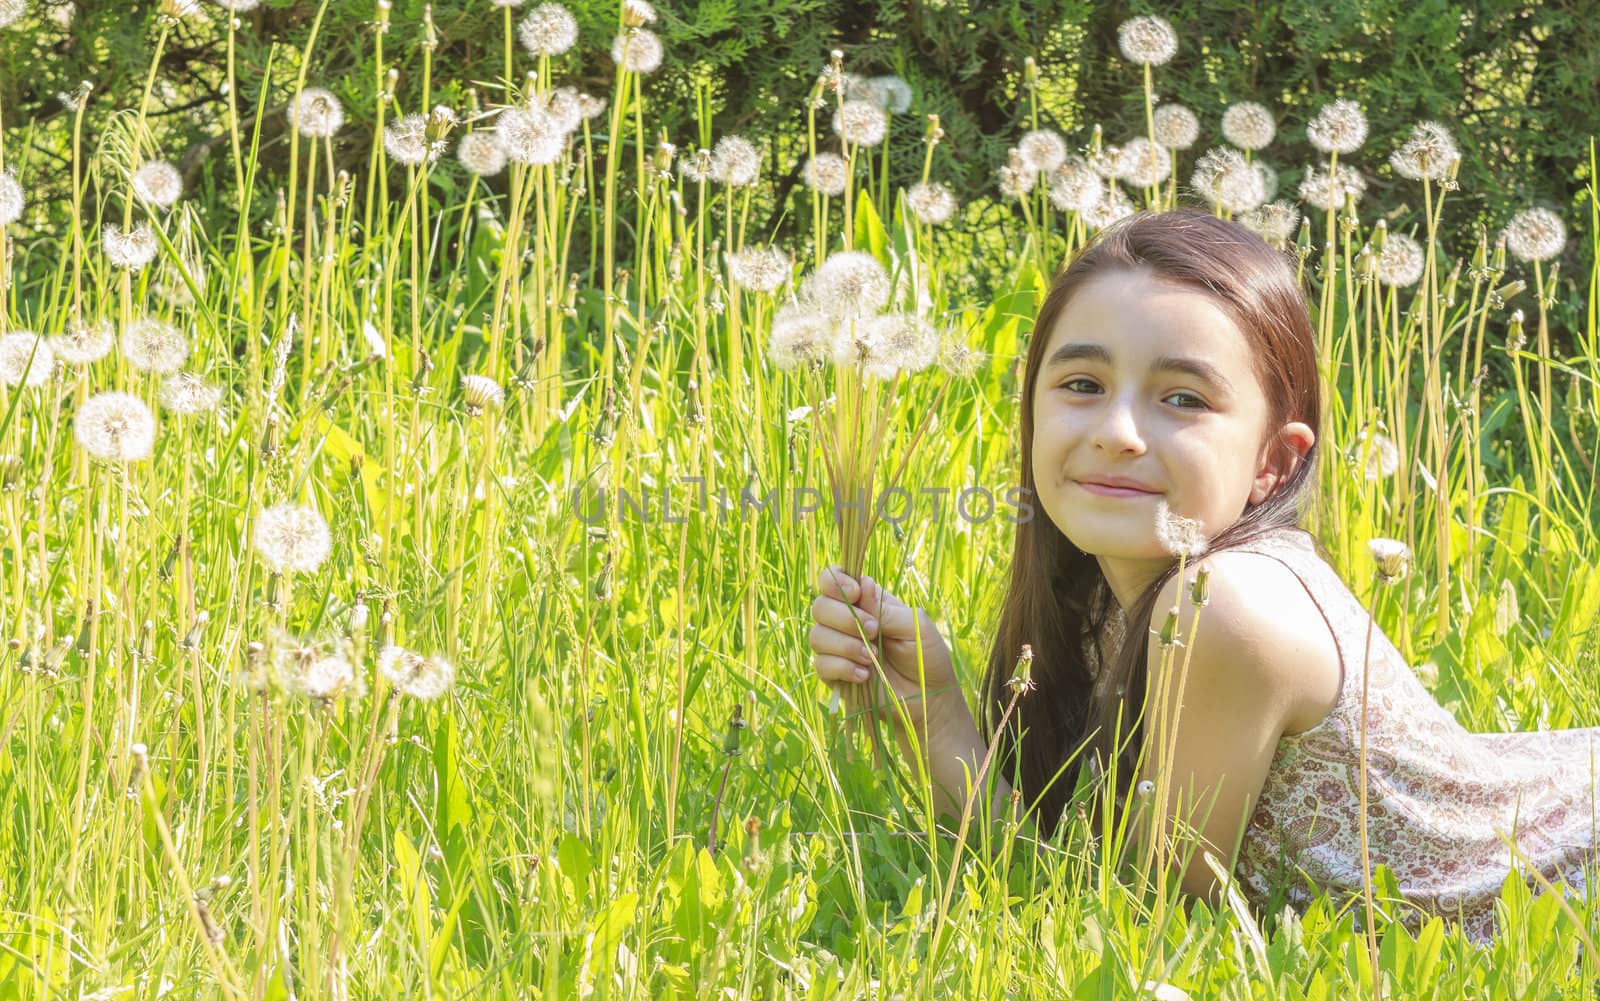 Little girl blowing dandelions, nine at the same time